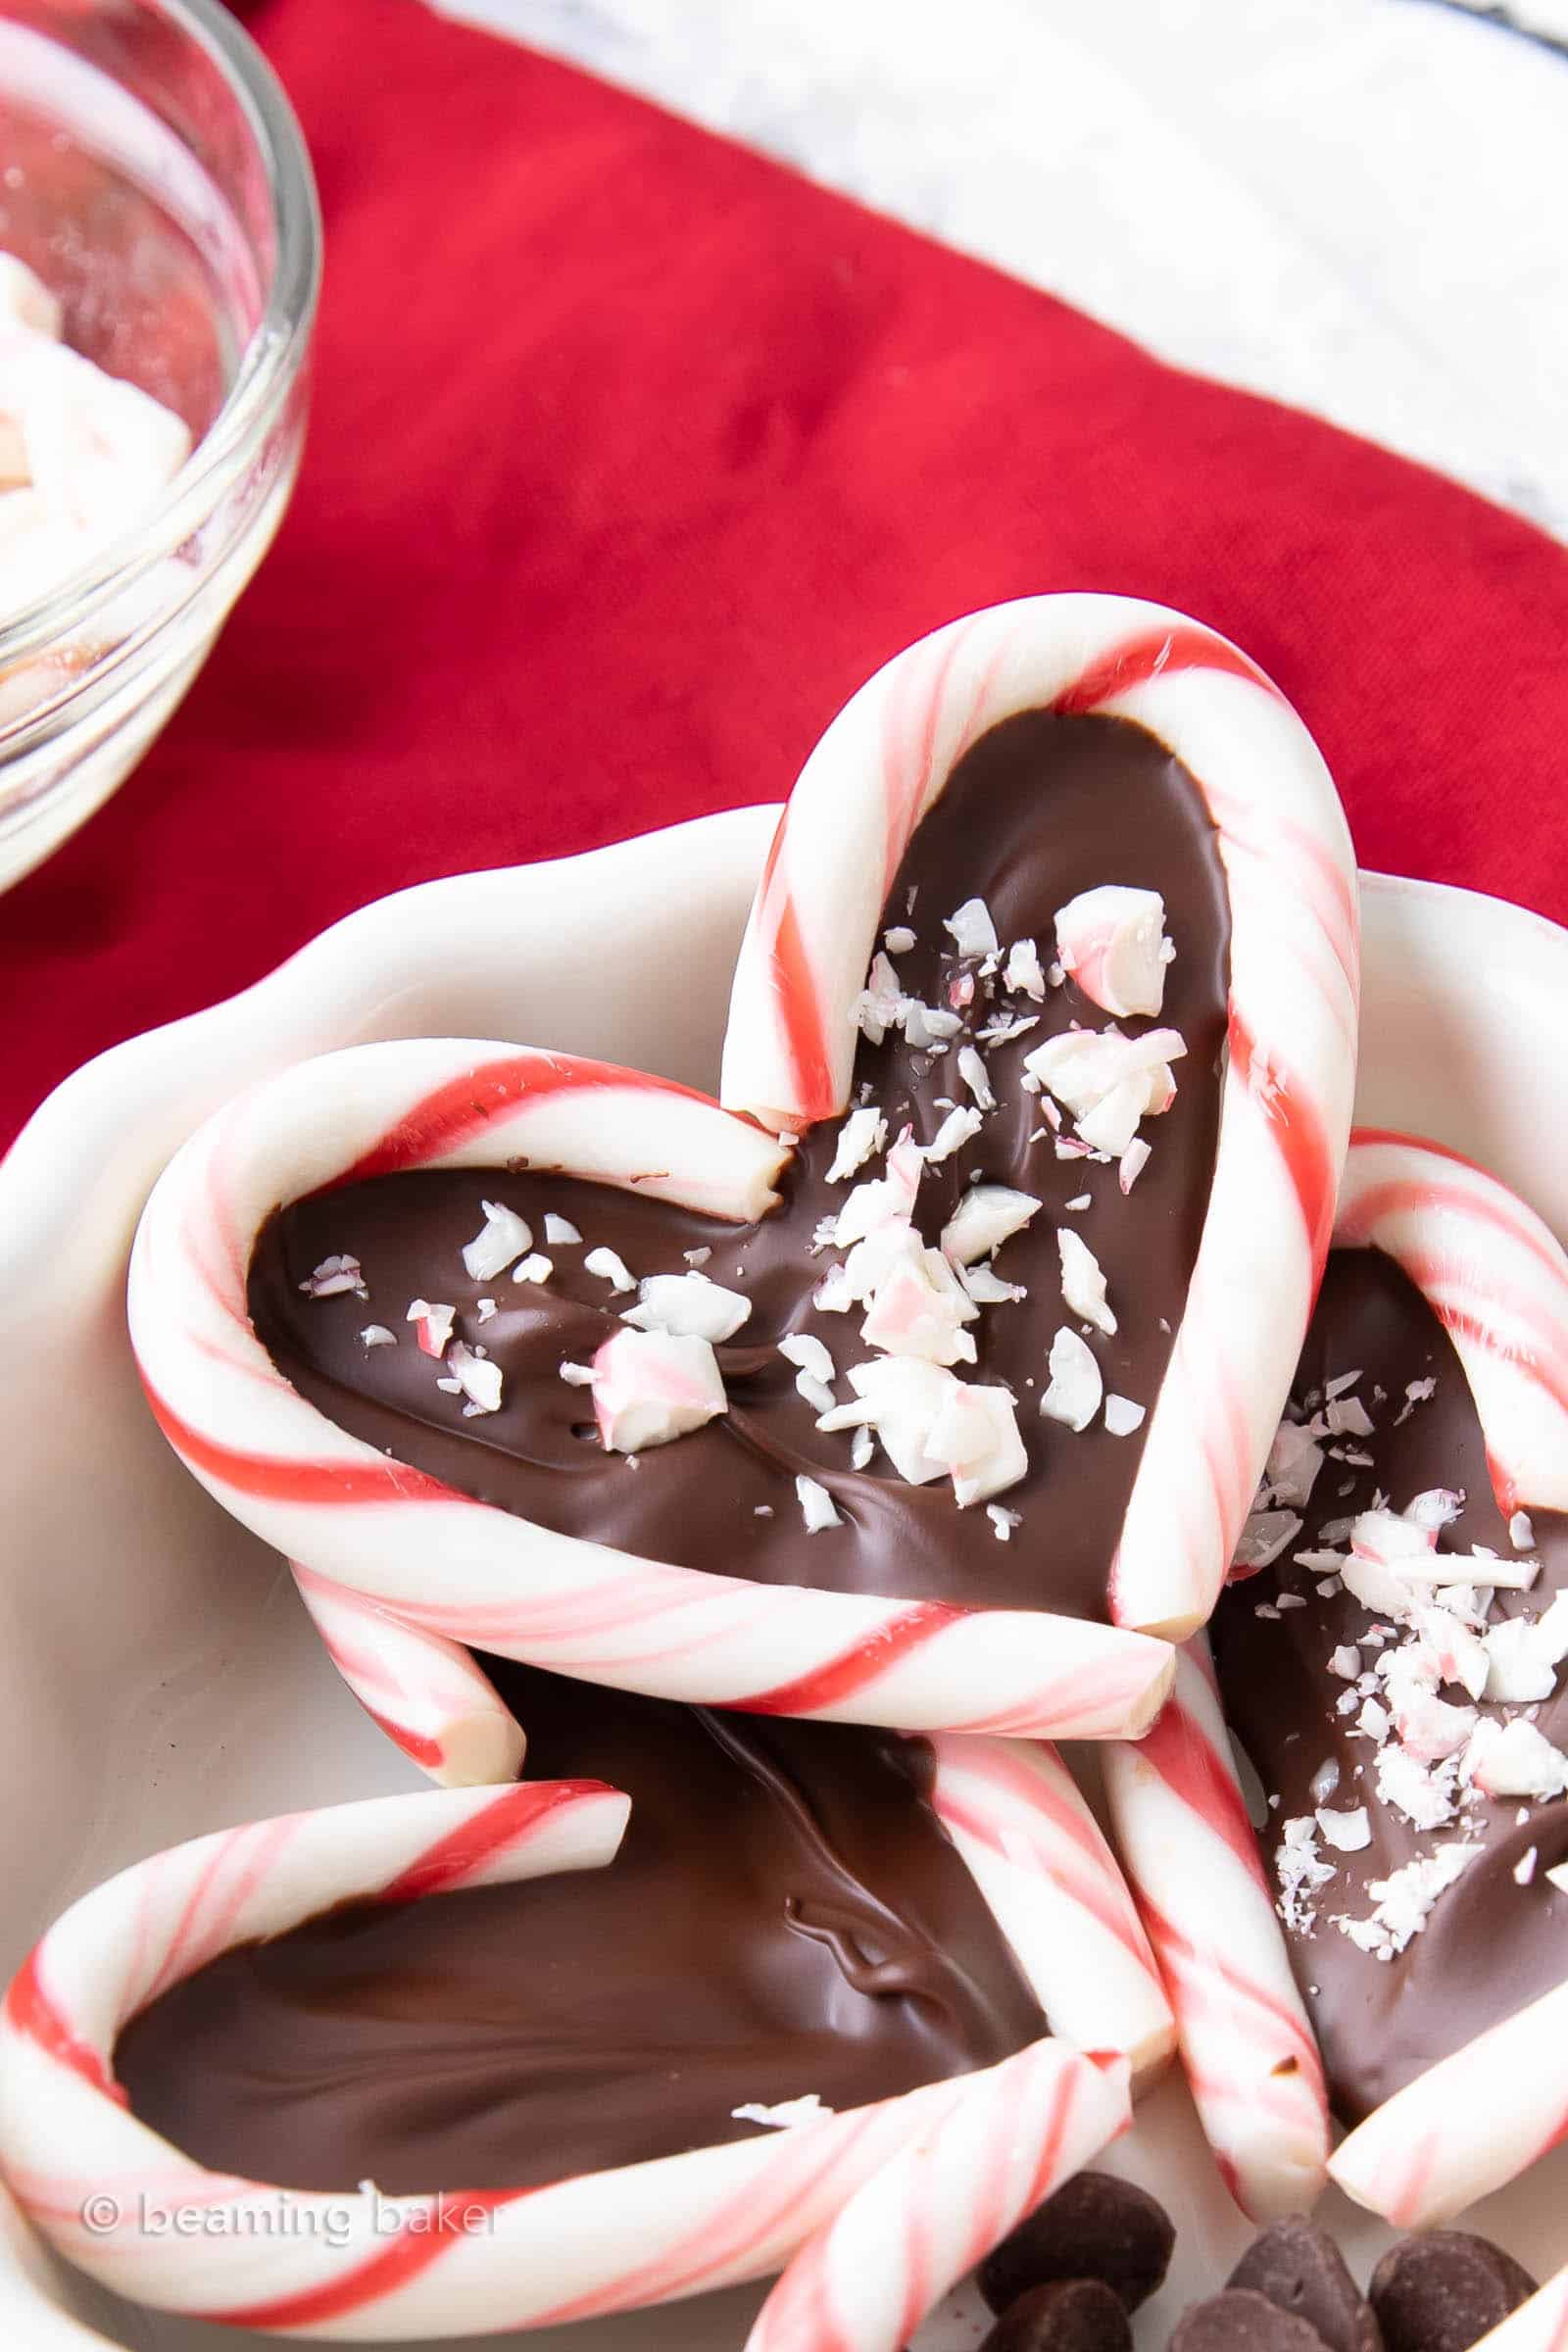 Super closeup shot of candy cane hearts in a bowl with chocolate chips and more candy canes as garnish